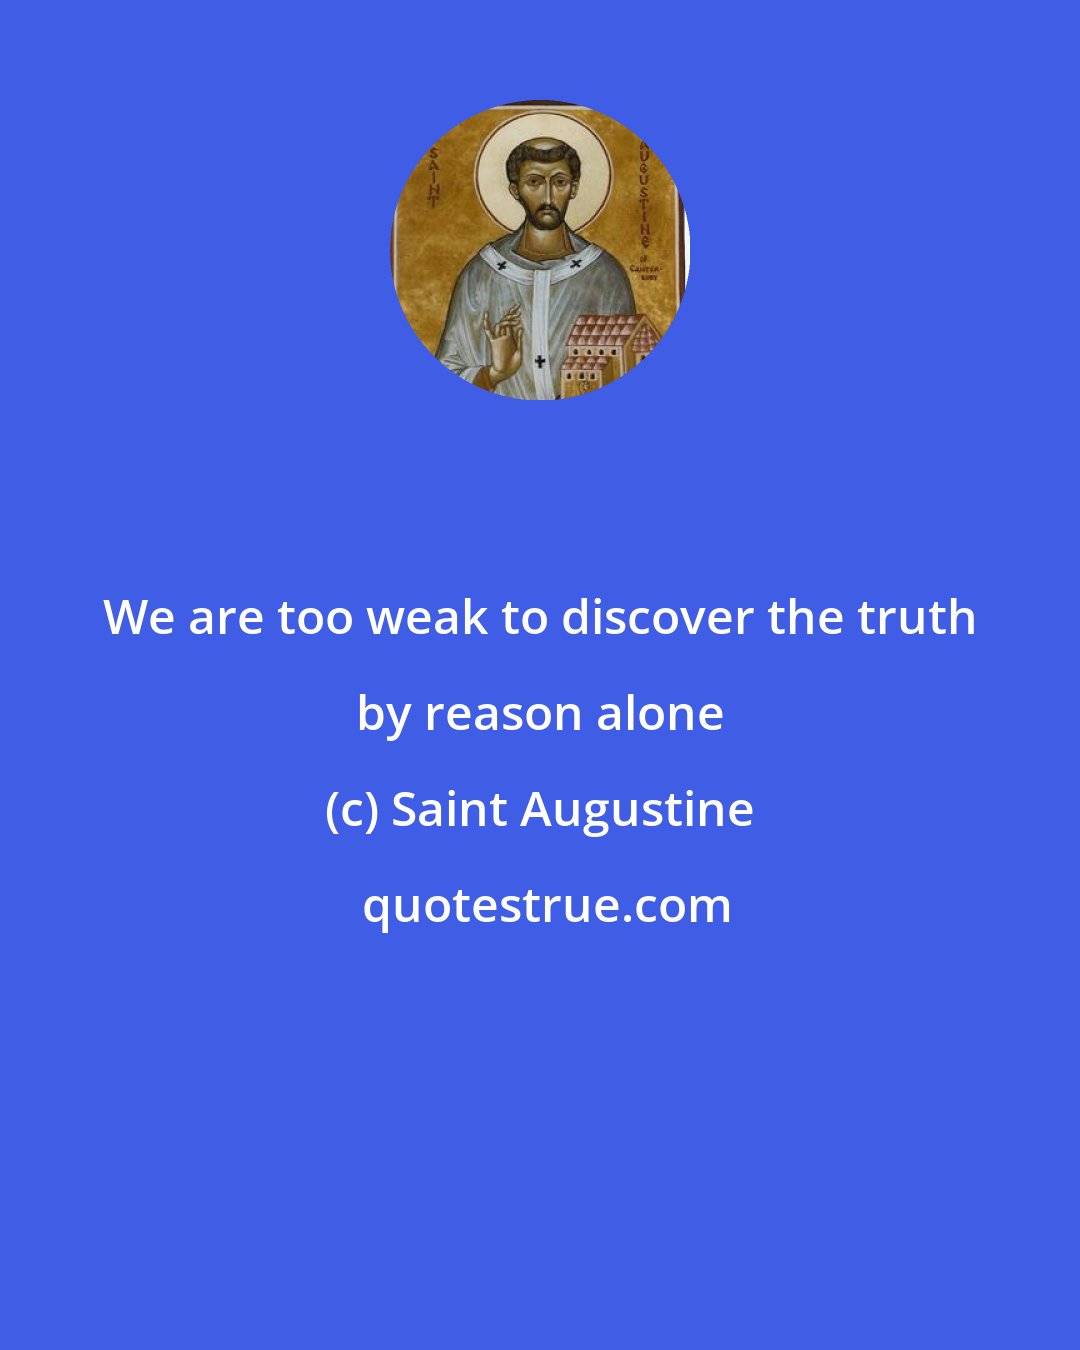 Saint Augustine: We are too weak to discover the truth by reason alone